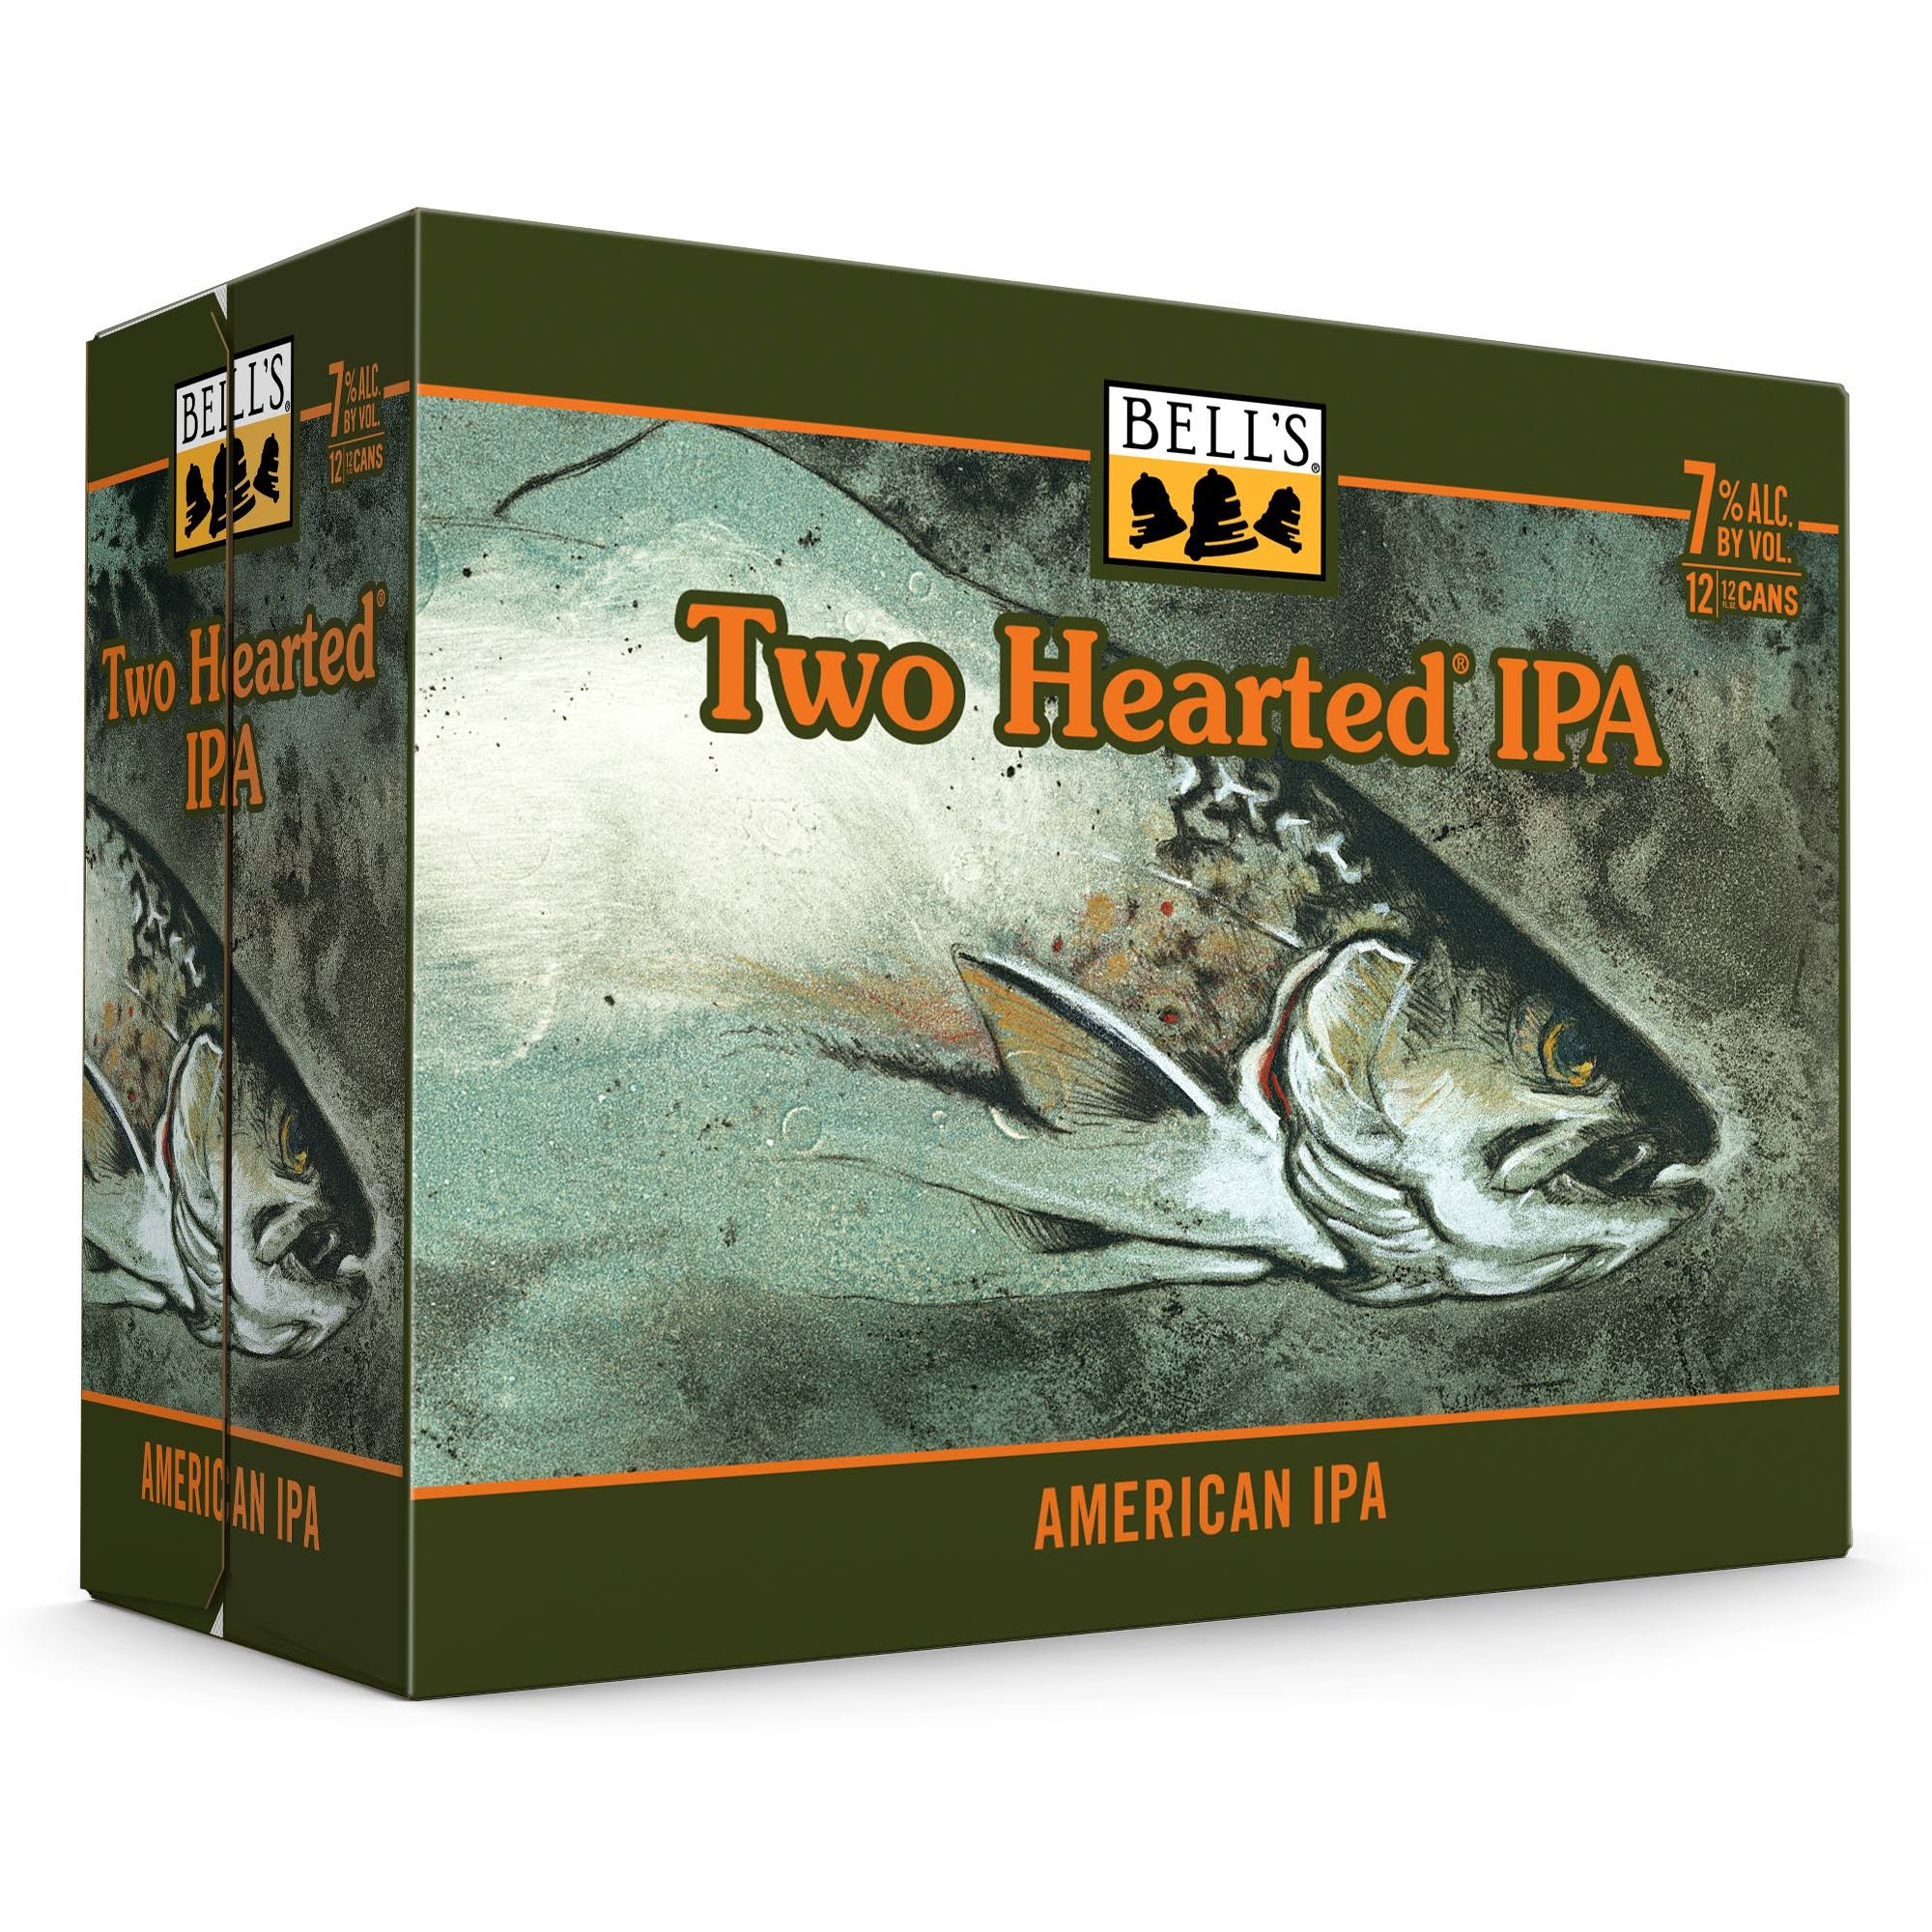 Bell's Beer, American IPA, Two Hearted - 12 pack, 12 fl oz cans